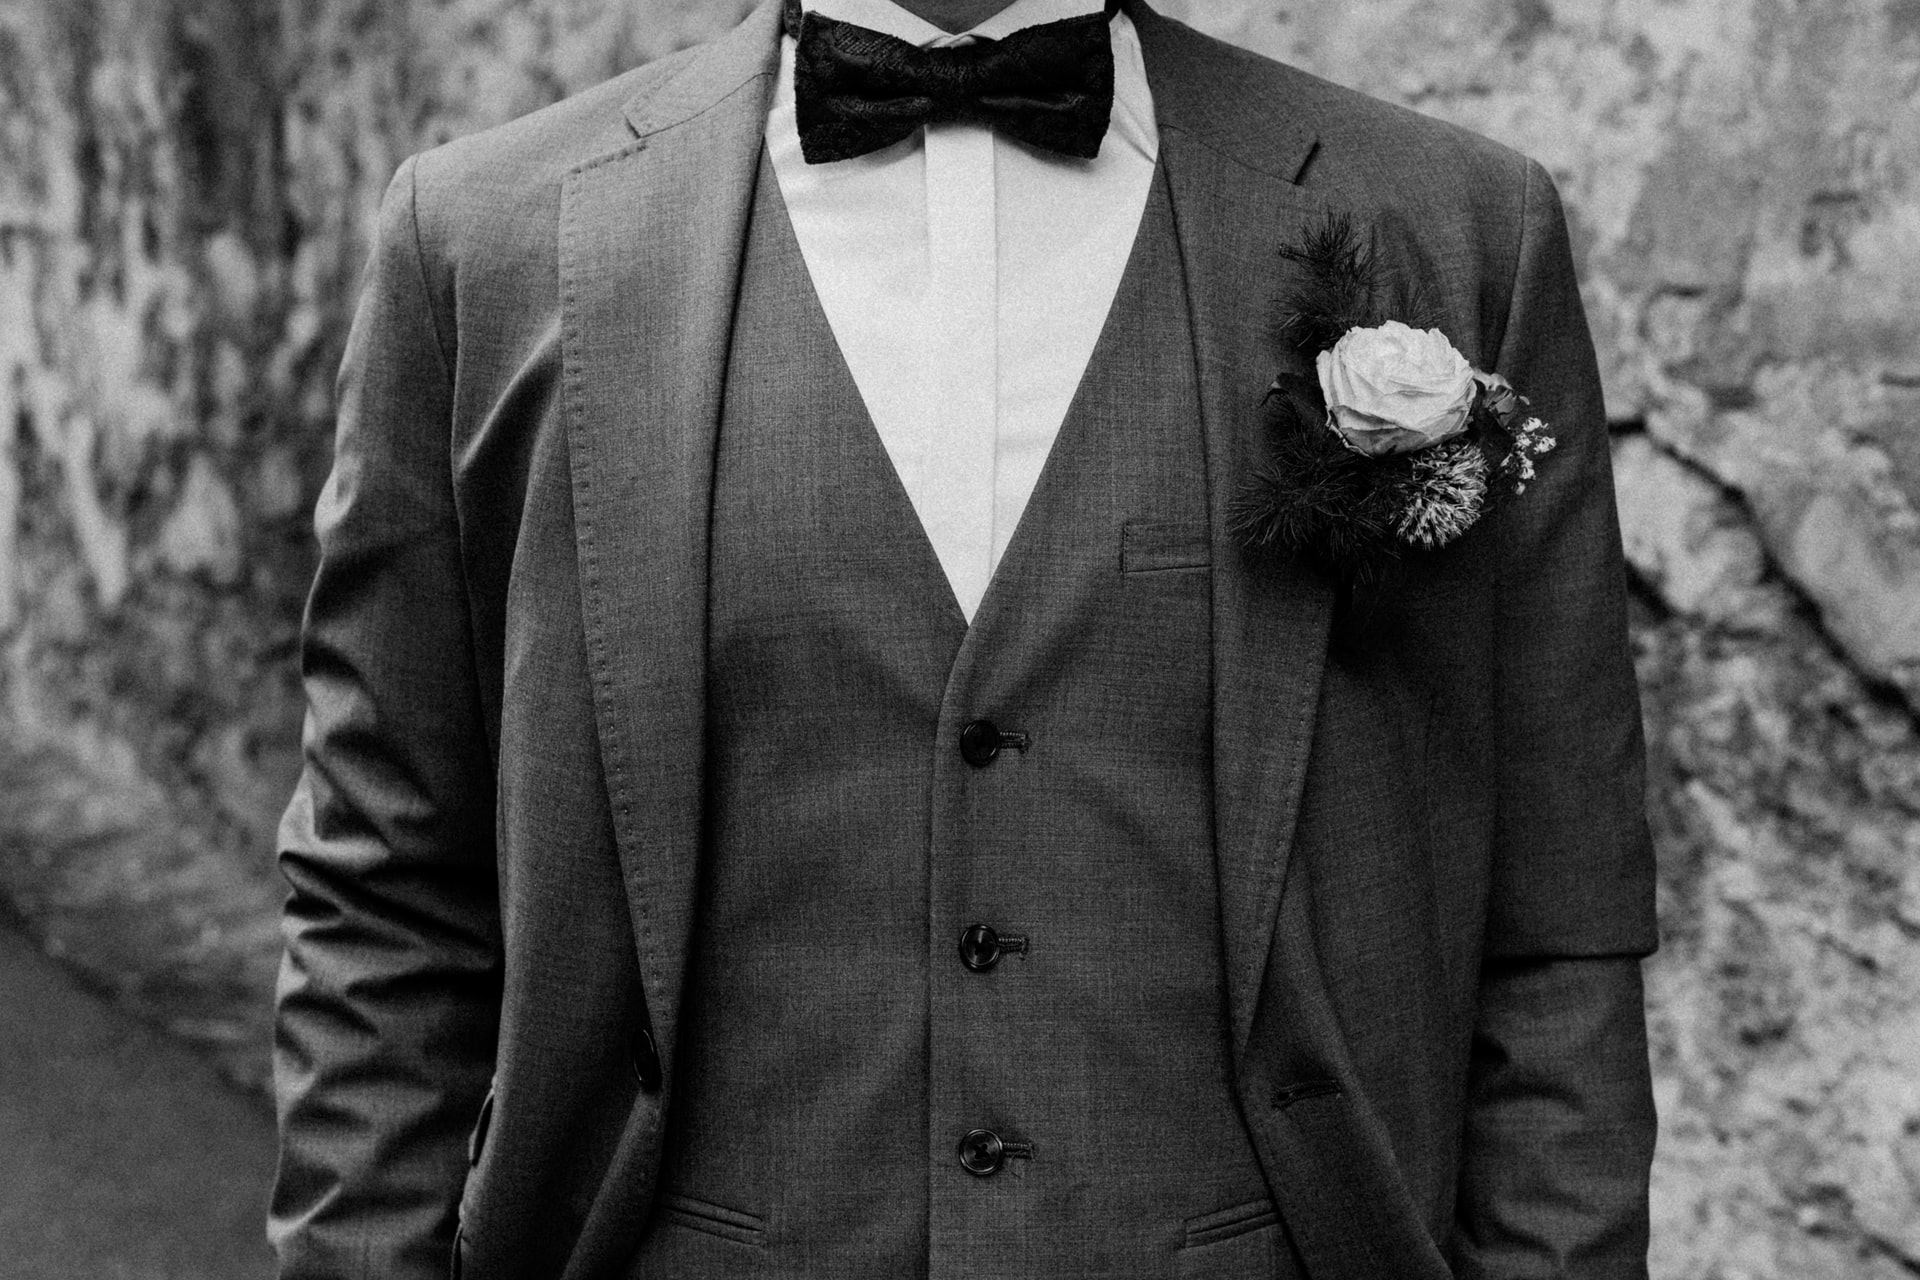 Out of Town Groomsmen Hero - Mobile Image